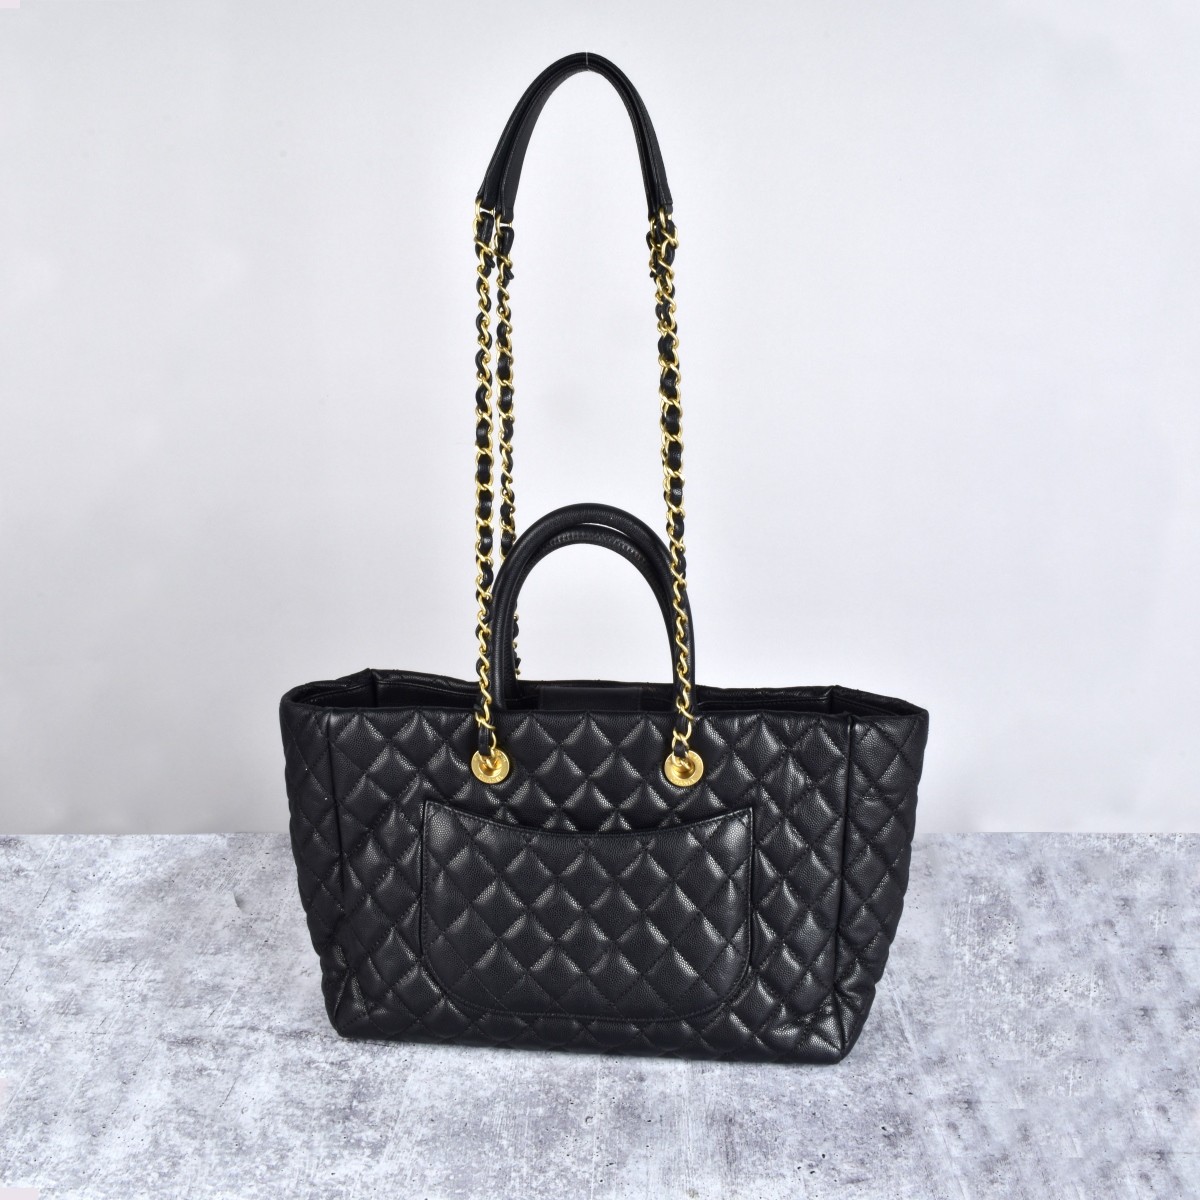 Chanel Leather Shopping Tote